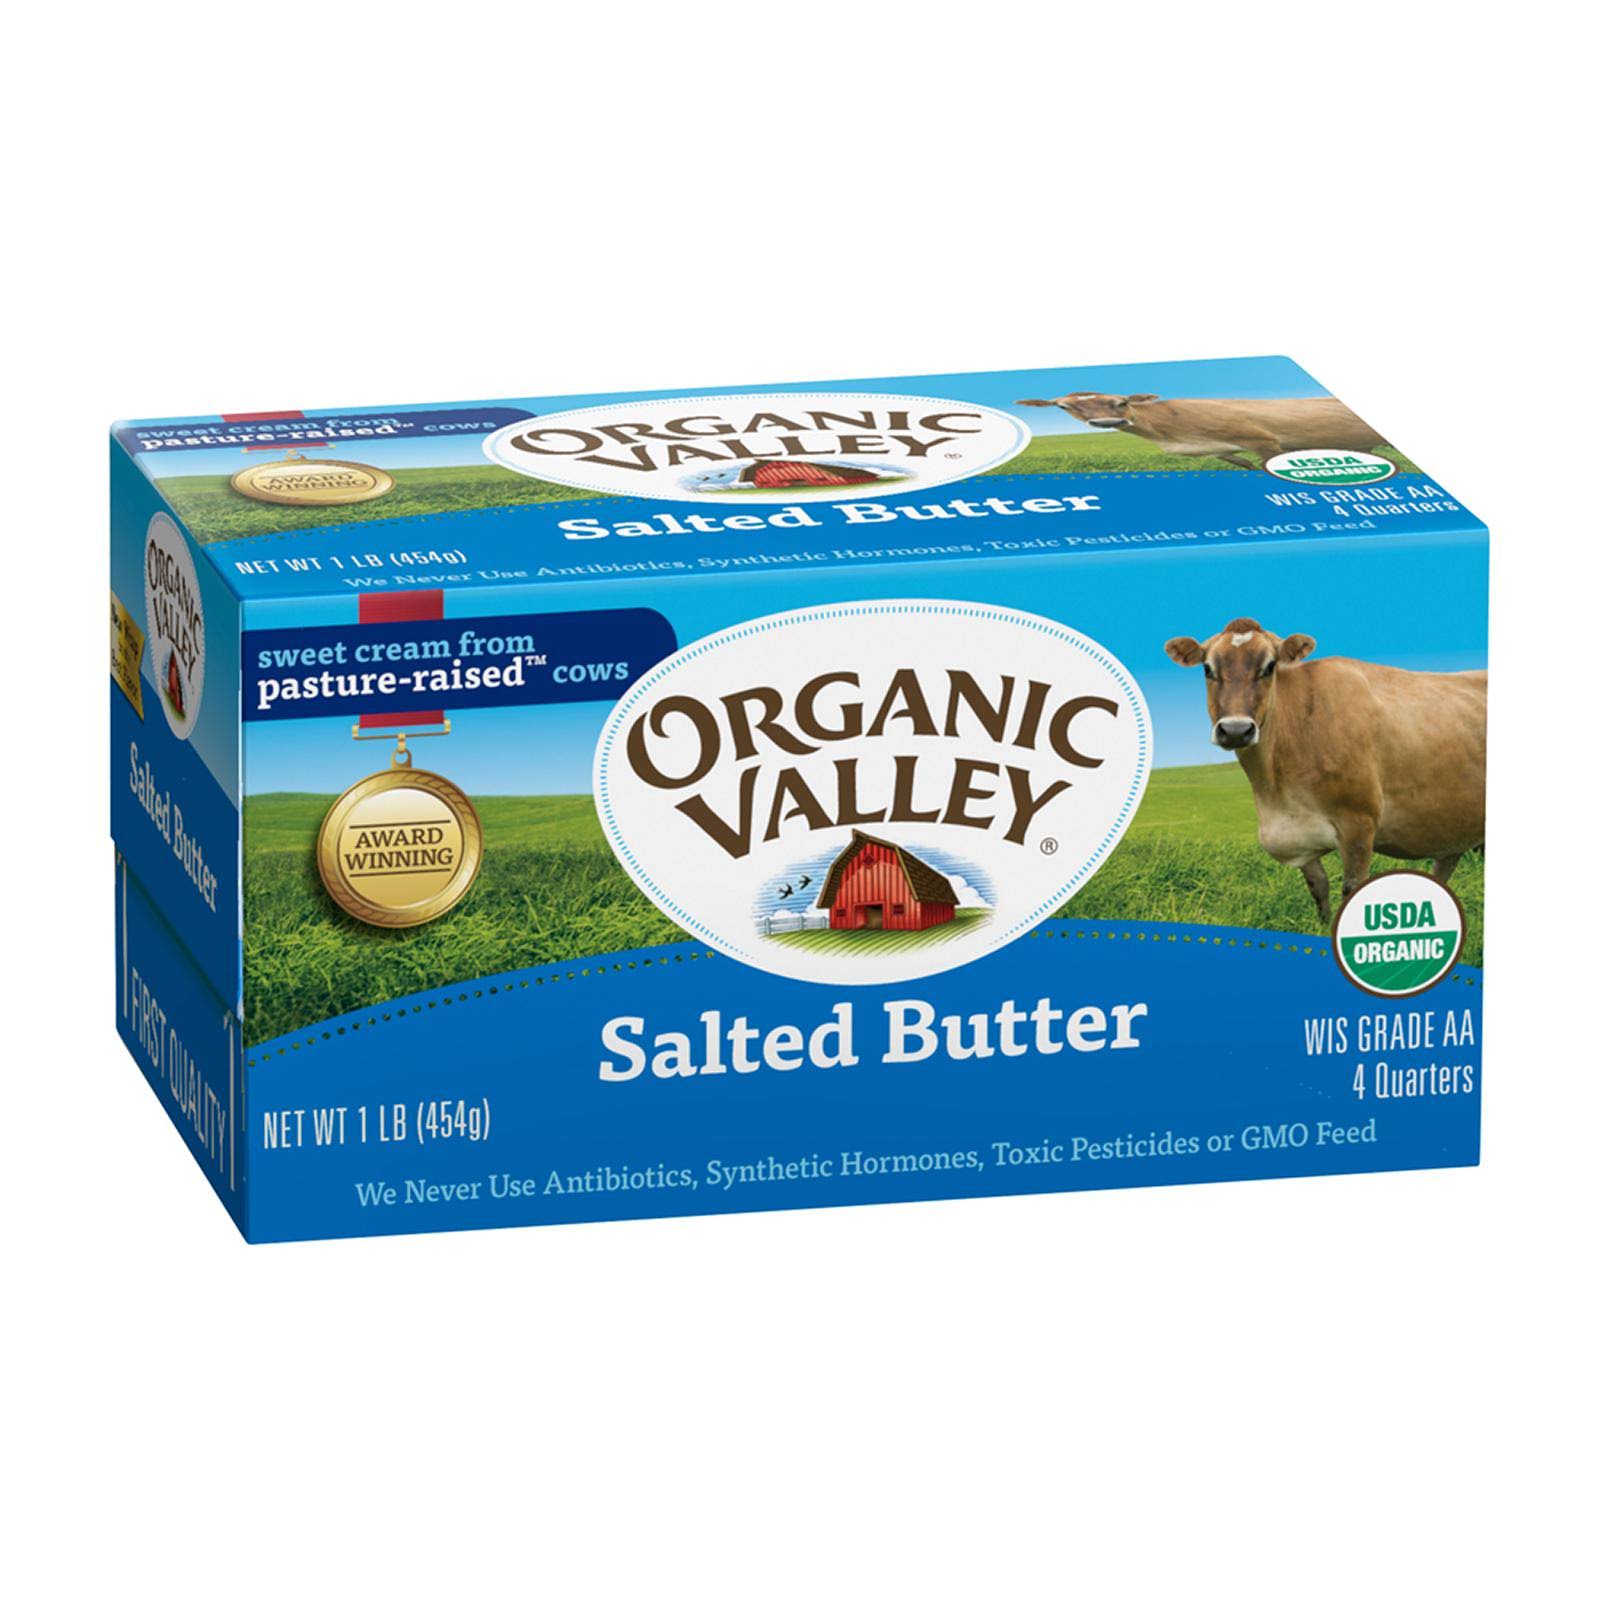 Organic Valley Salted Butter - 454g